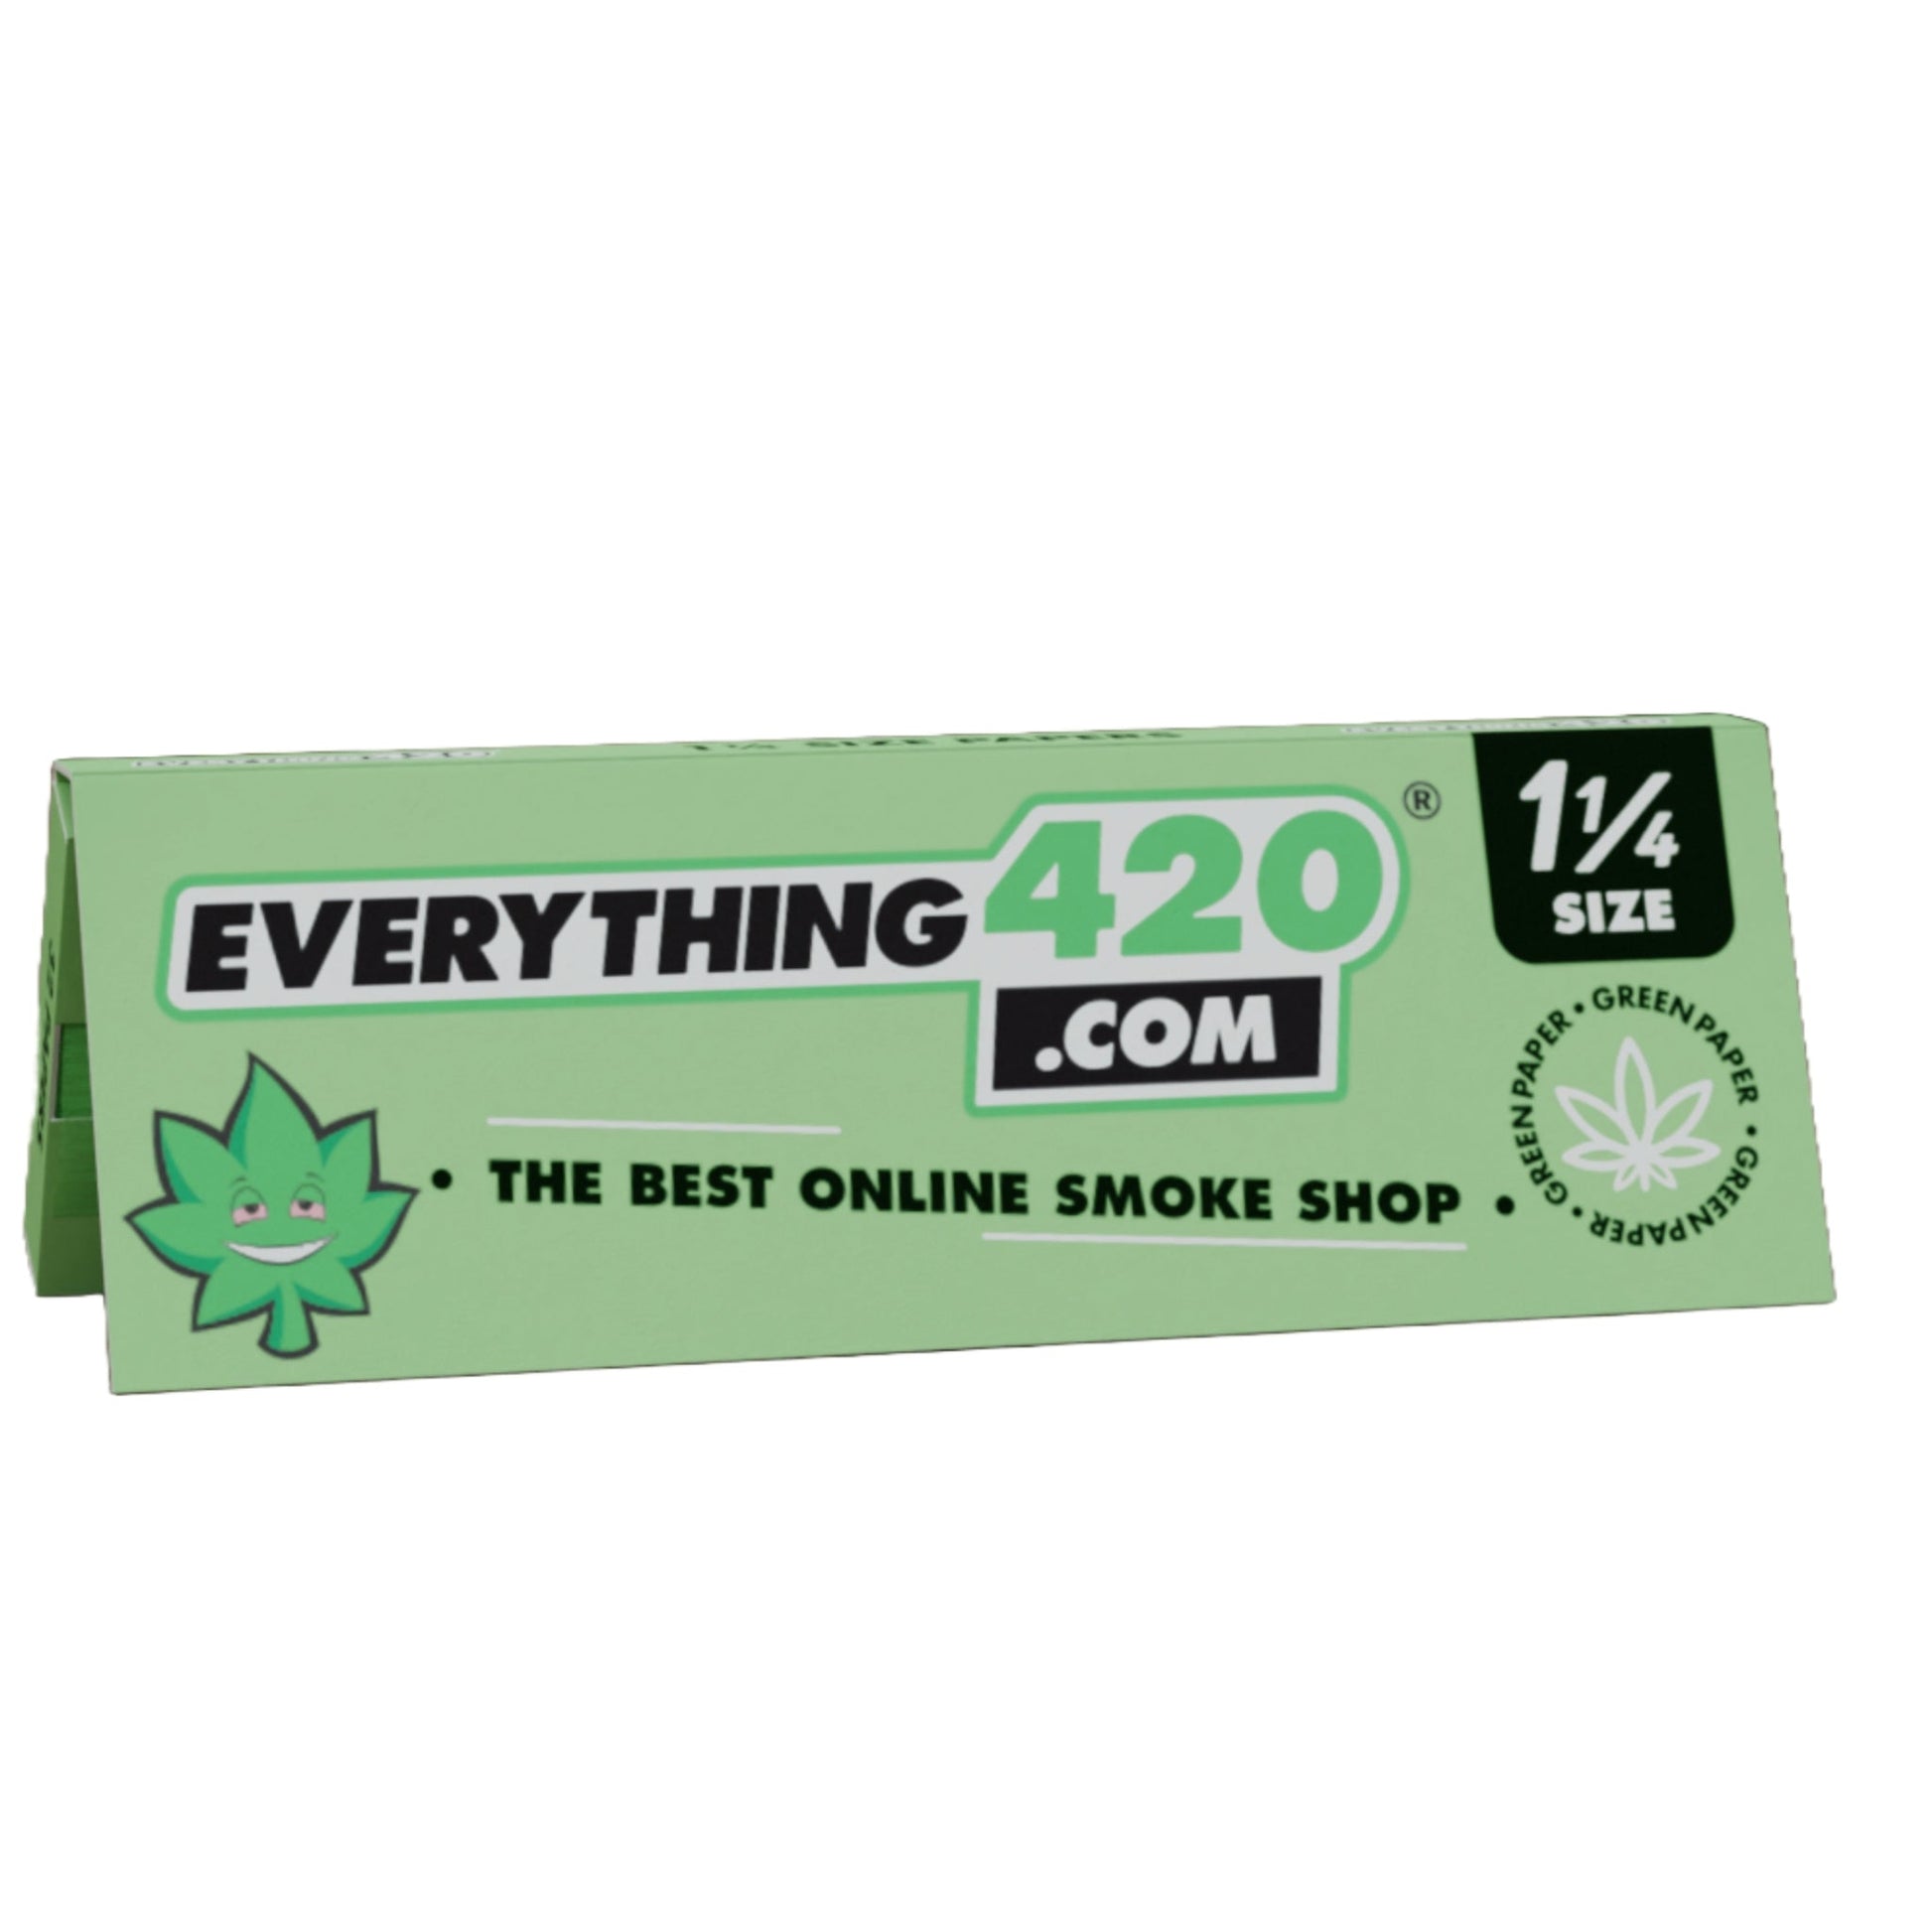 Everything 420 Rolling Papers - 1 1/4" Green